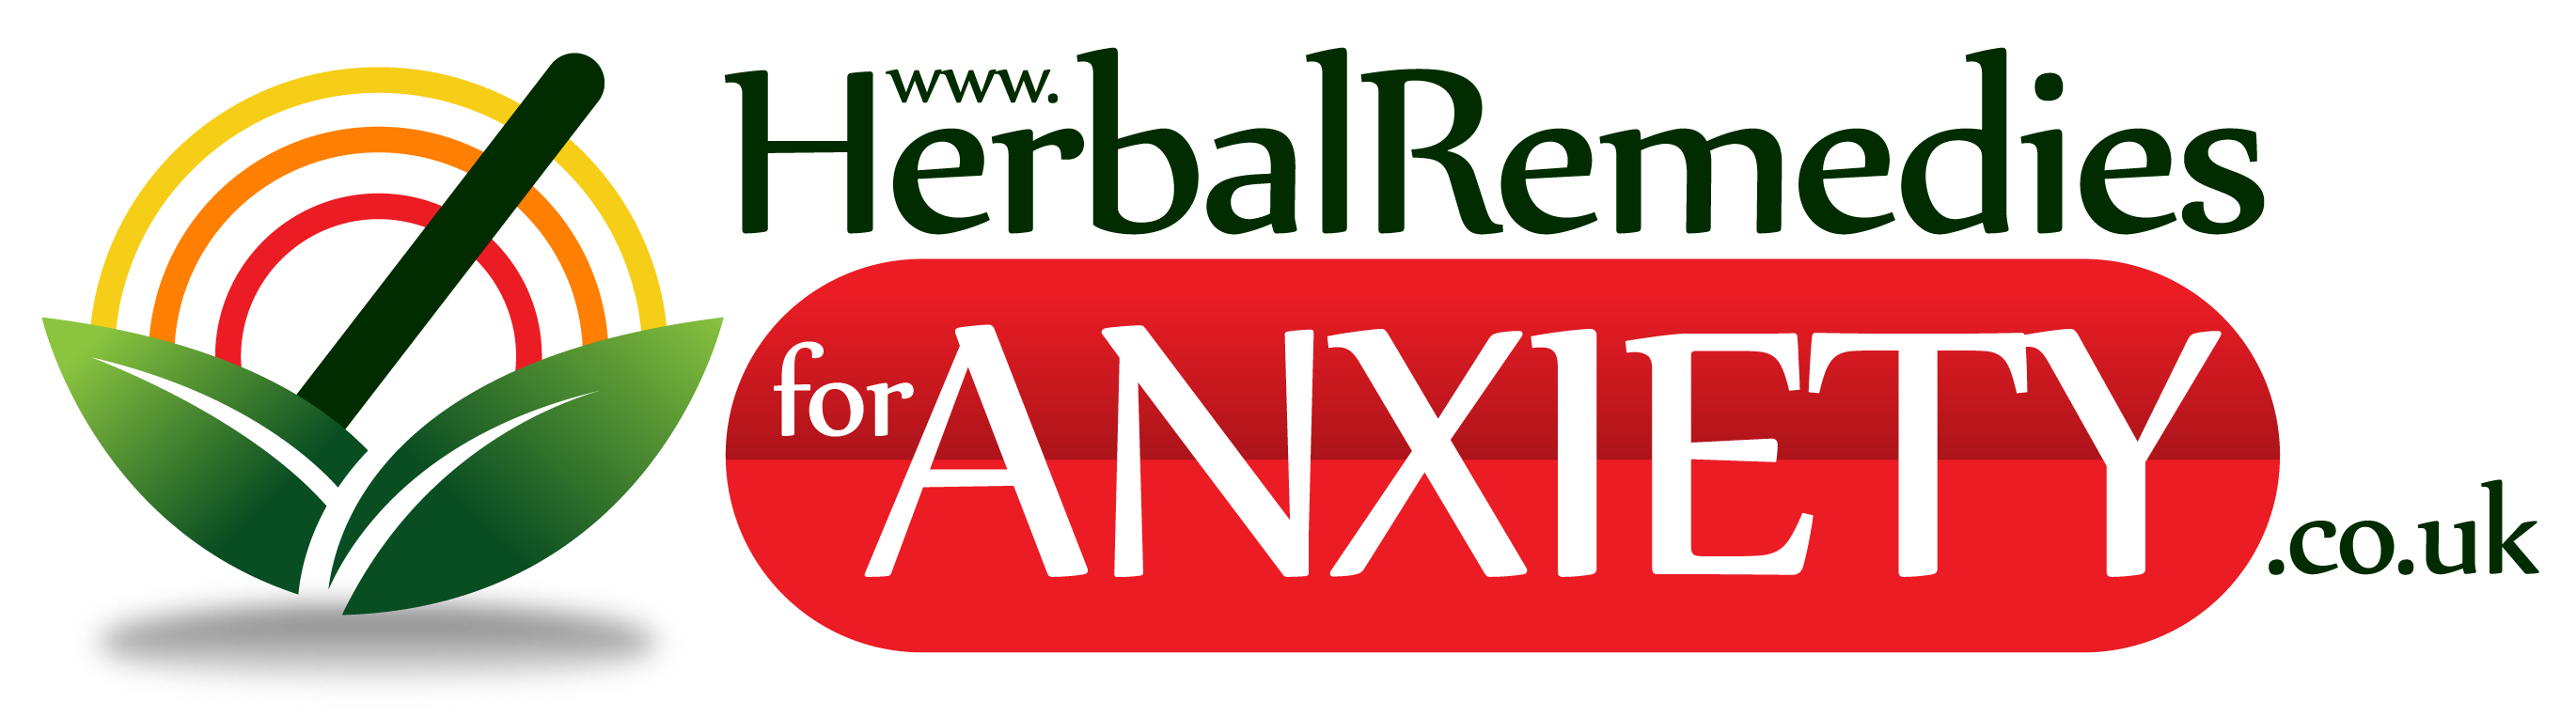 Herbal remedies for anxiety